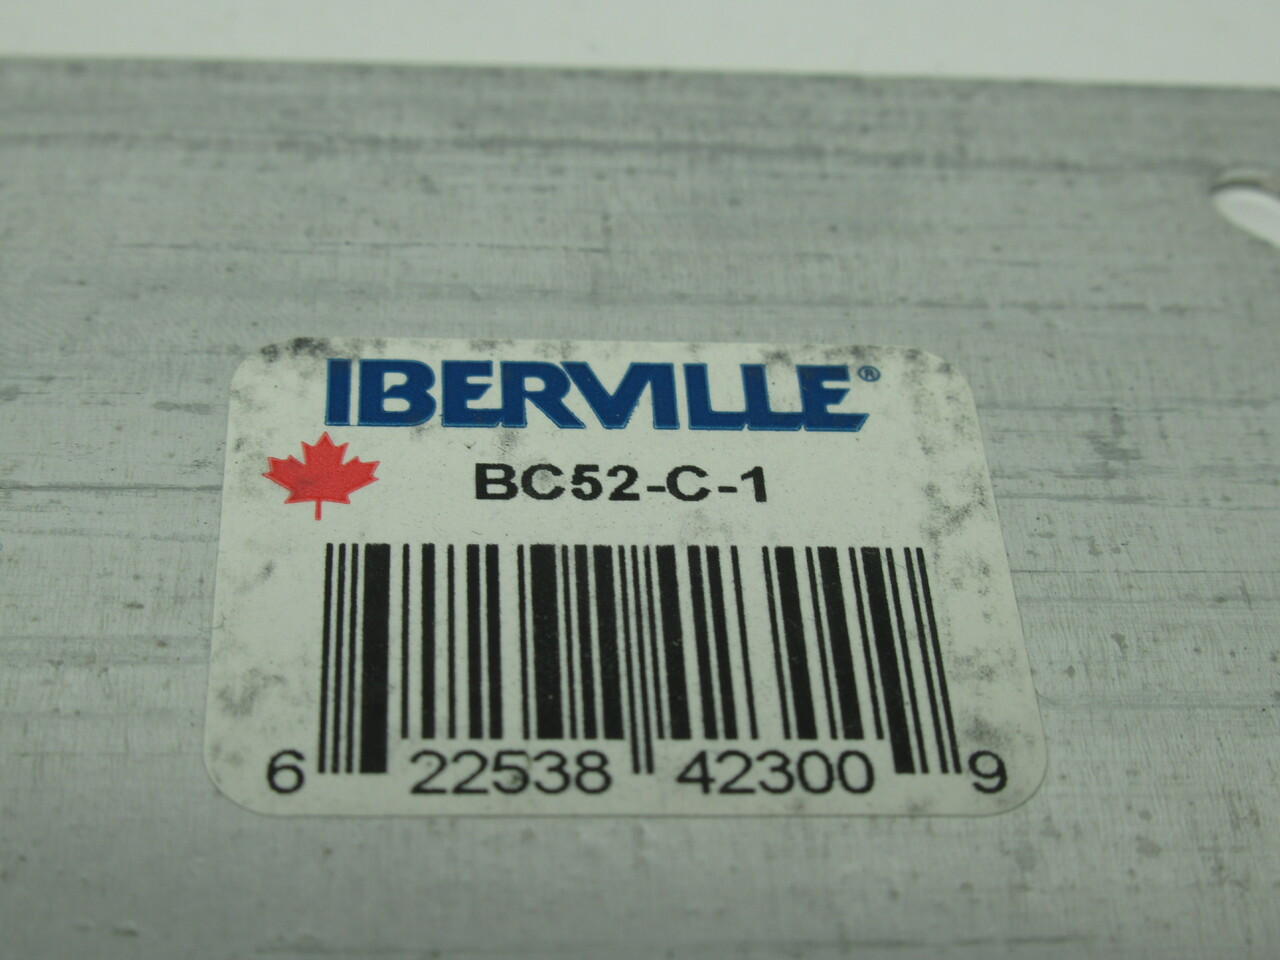 Iberville BC52-C-1 Steel Square Box Cover 4" Lot Of 5 NOP